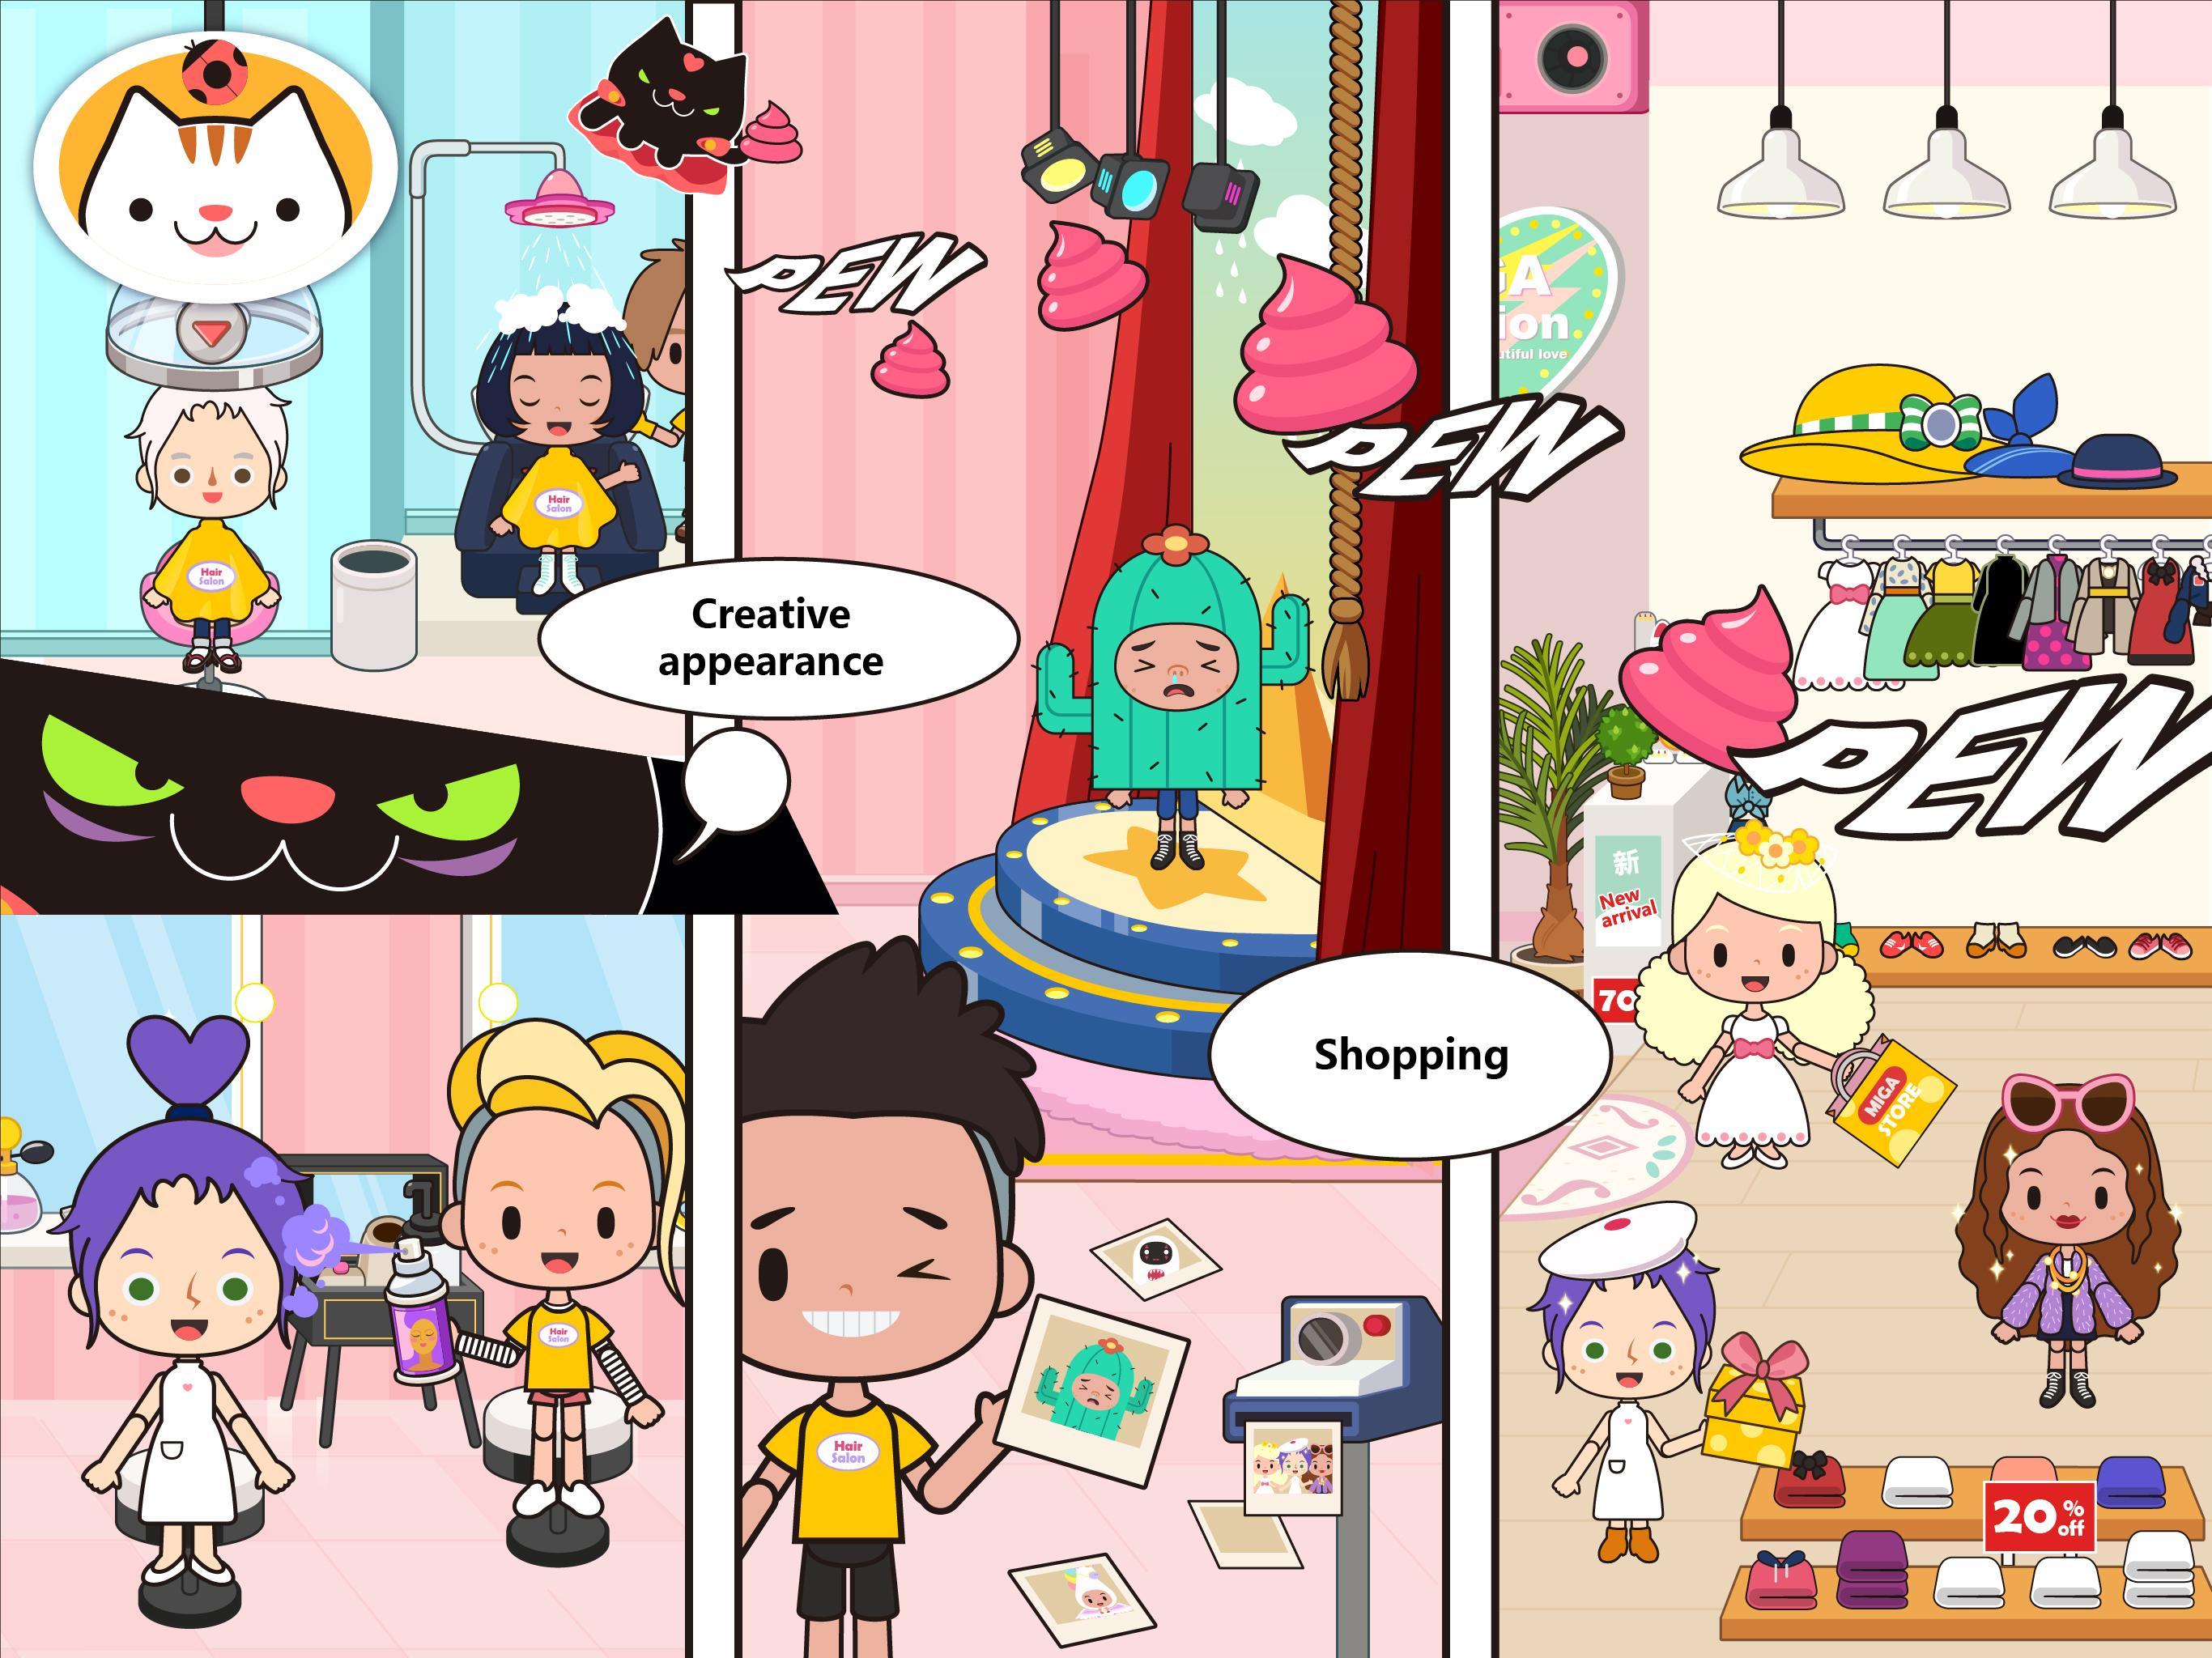 Miga Town for Android - APK Download